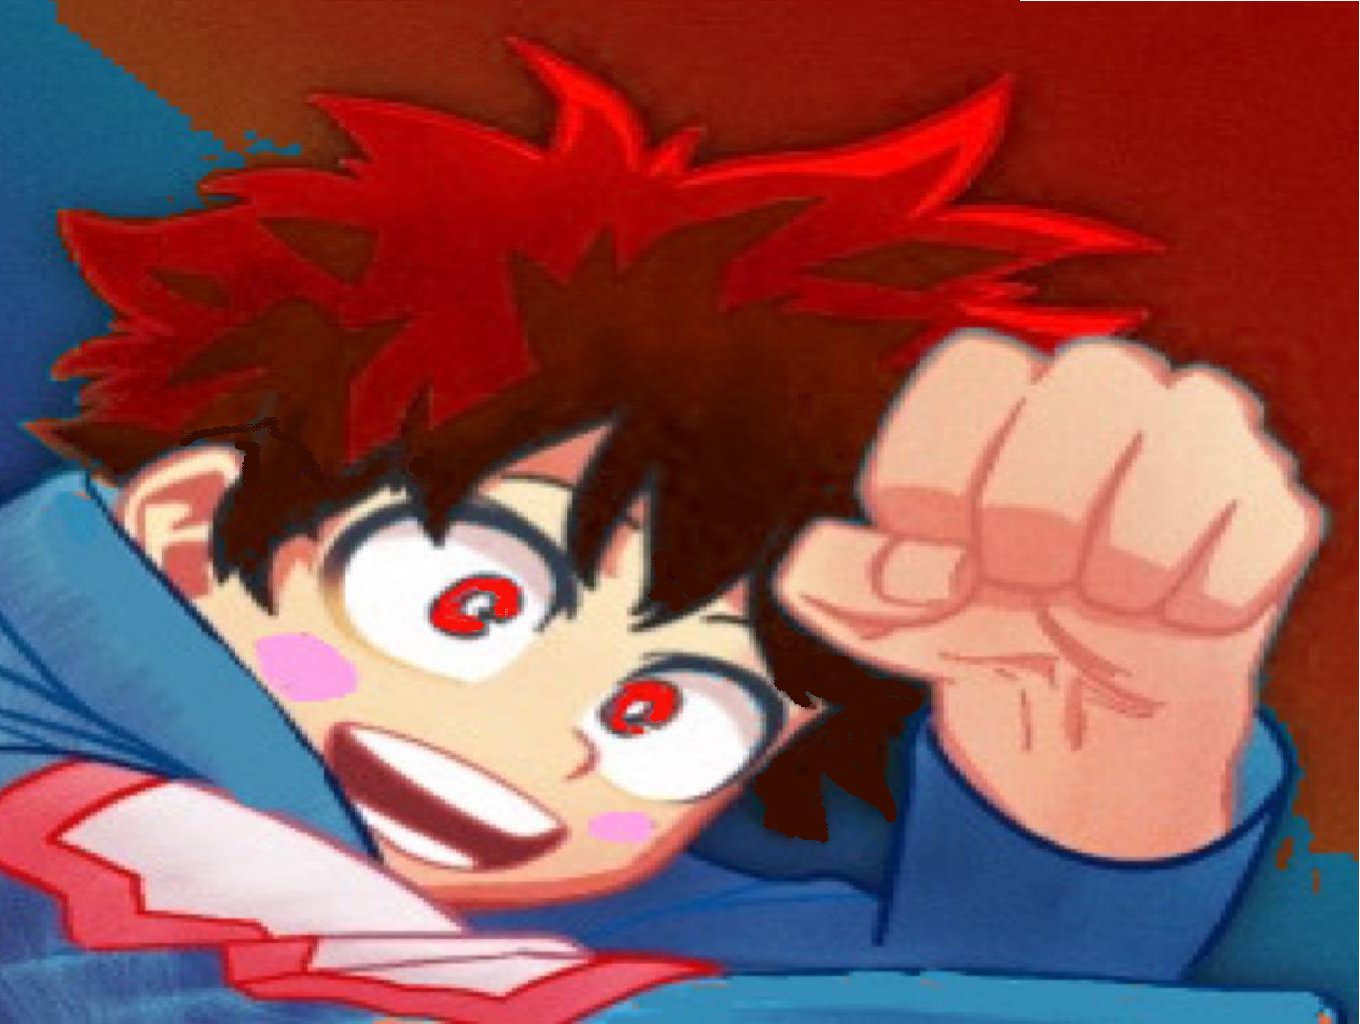 Do people still like Deku? I mean with the multiple quirks and